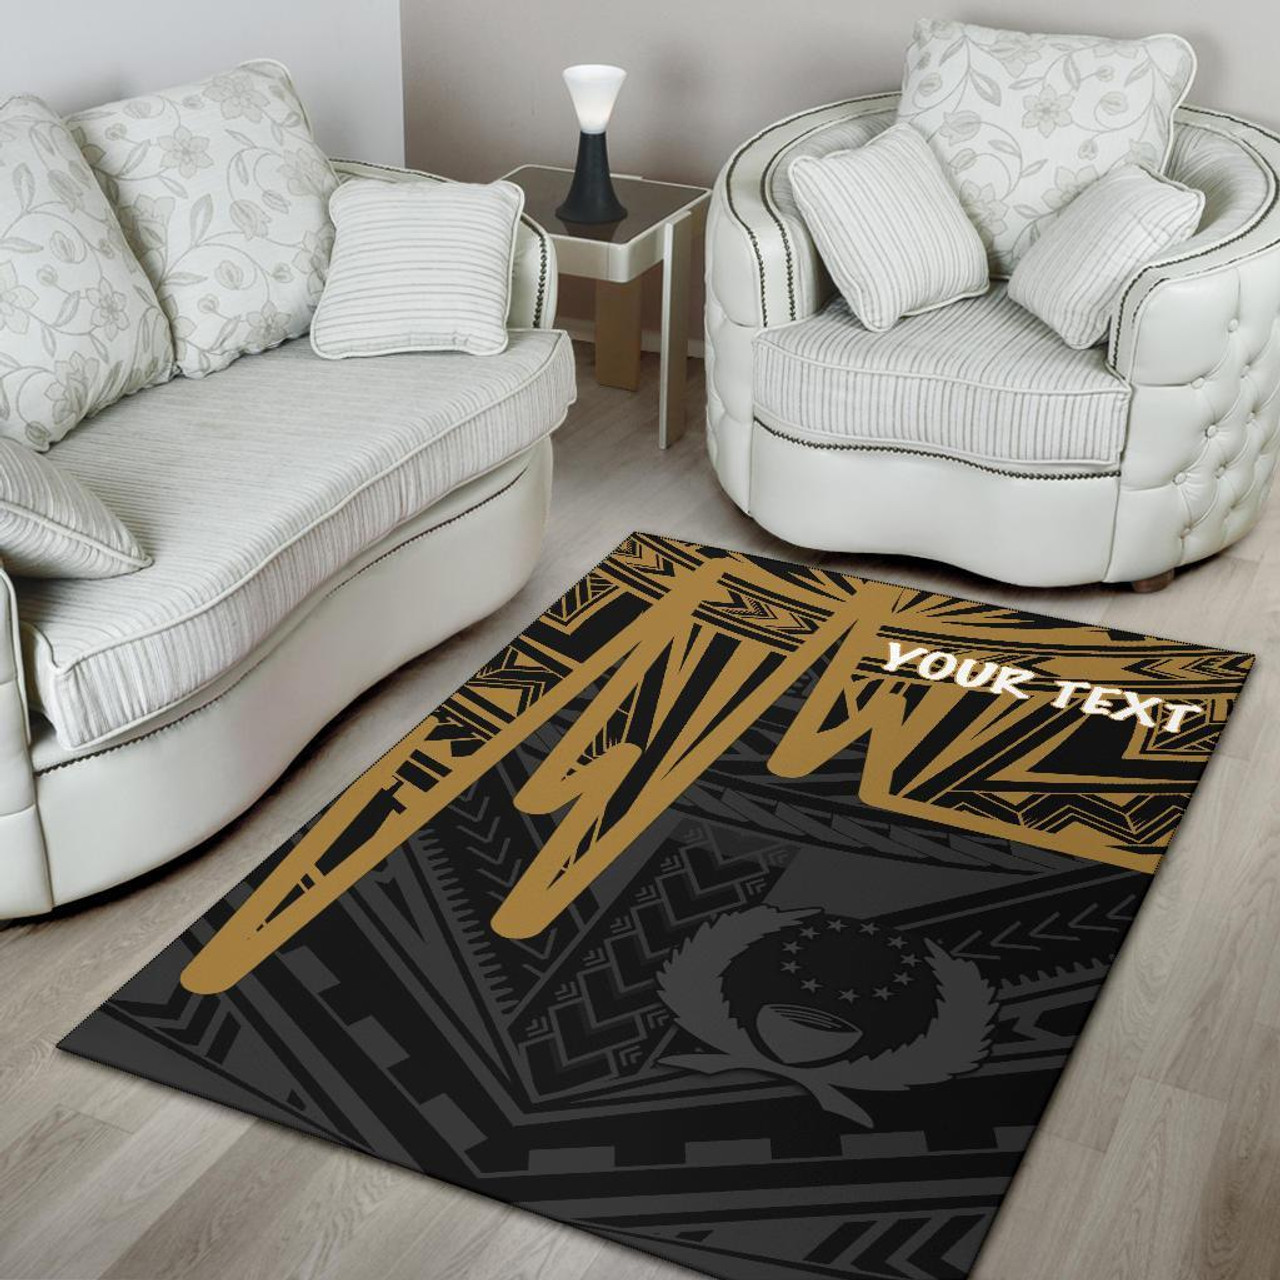 Pohnpei Personalised Area Rug - Pohnpei Seal In Heartbeat Patterns Style (Gold) Polynesian 4